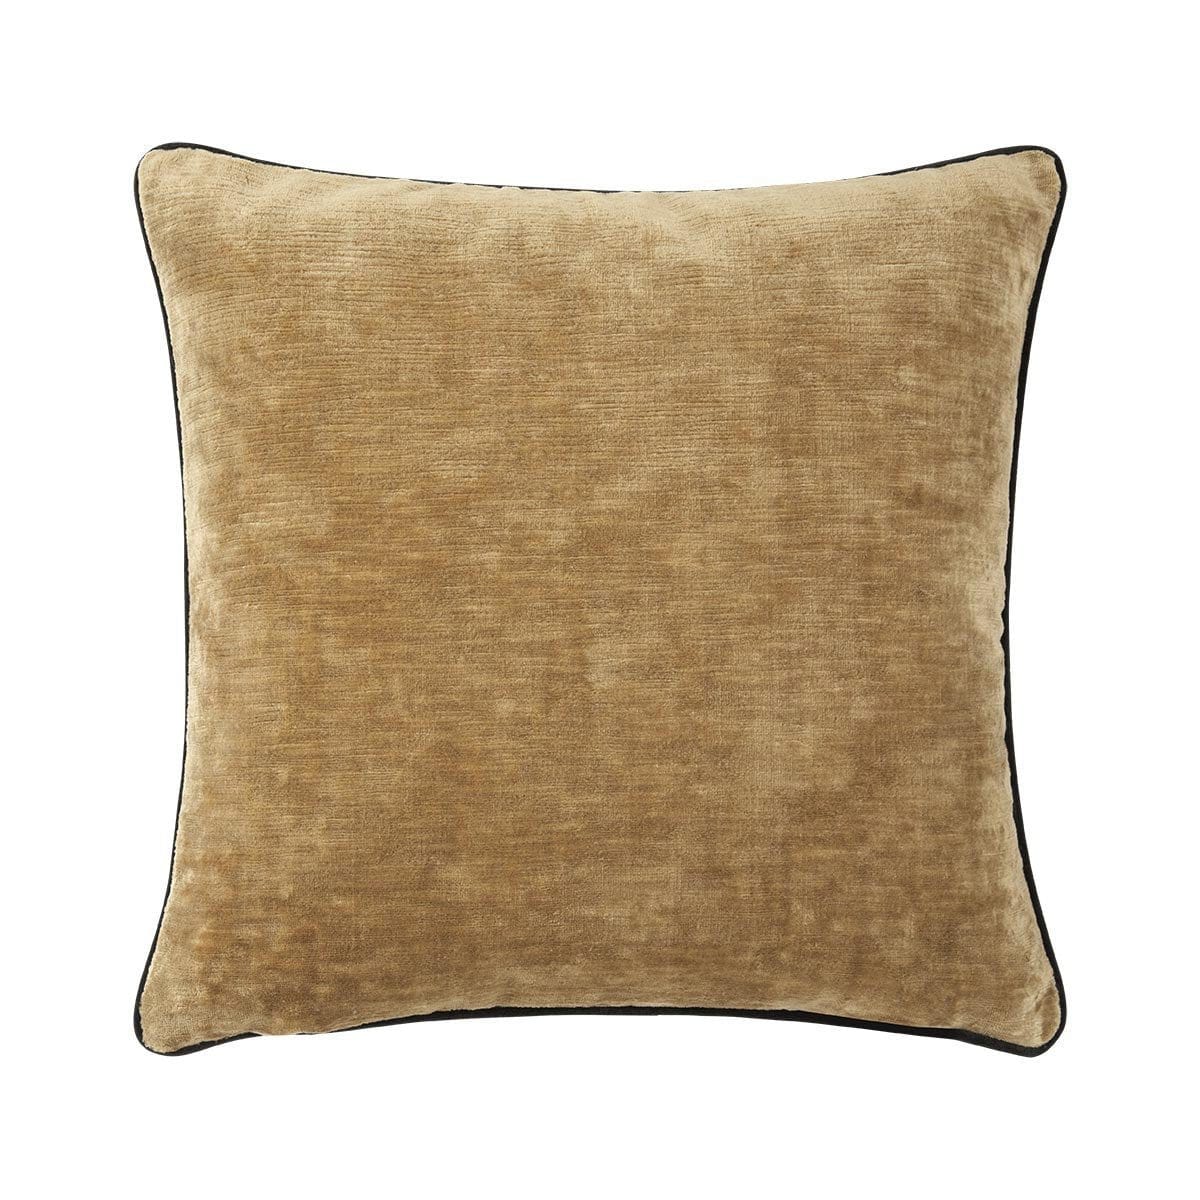 Decorative Pillows Iosis Boromée Decorative Pillow by Yves Delorme Daim (Wheat) / 18 x 18 in Yves Delorme